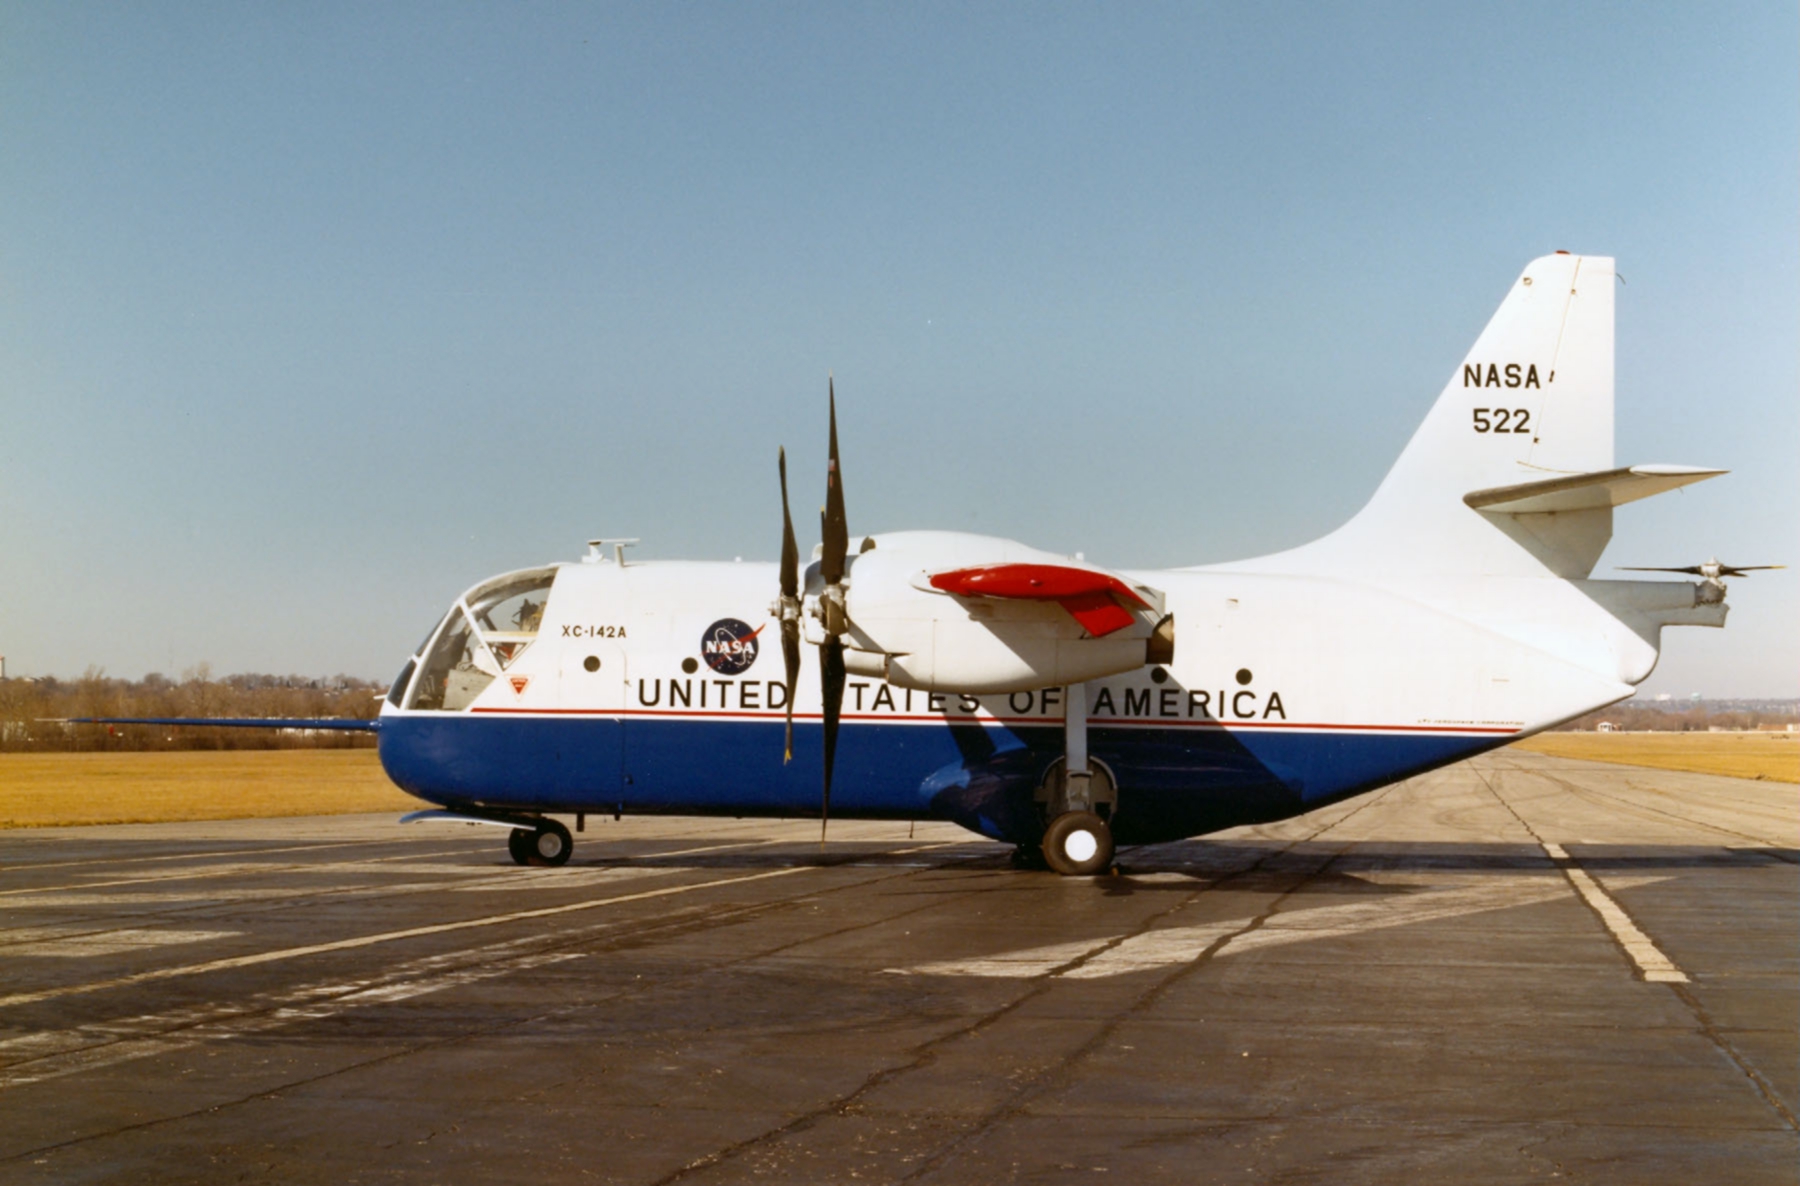 Ling-temco-vought Xc-142 #9